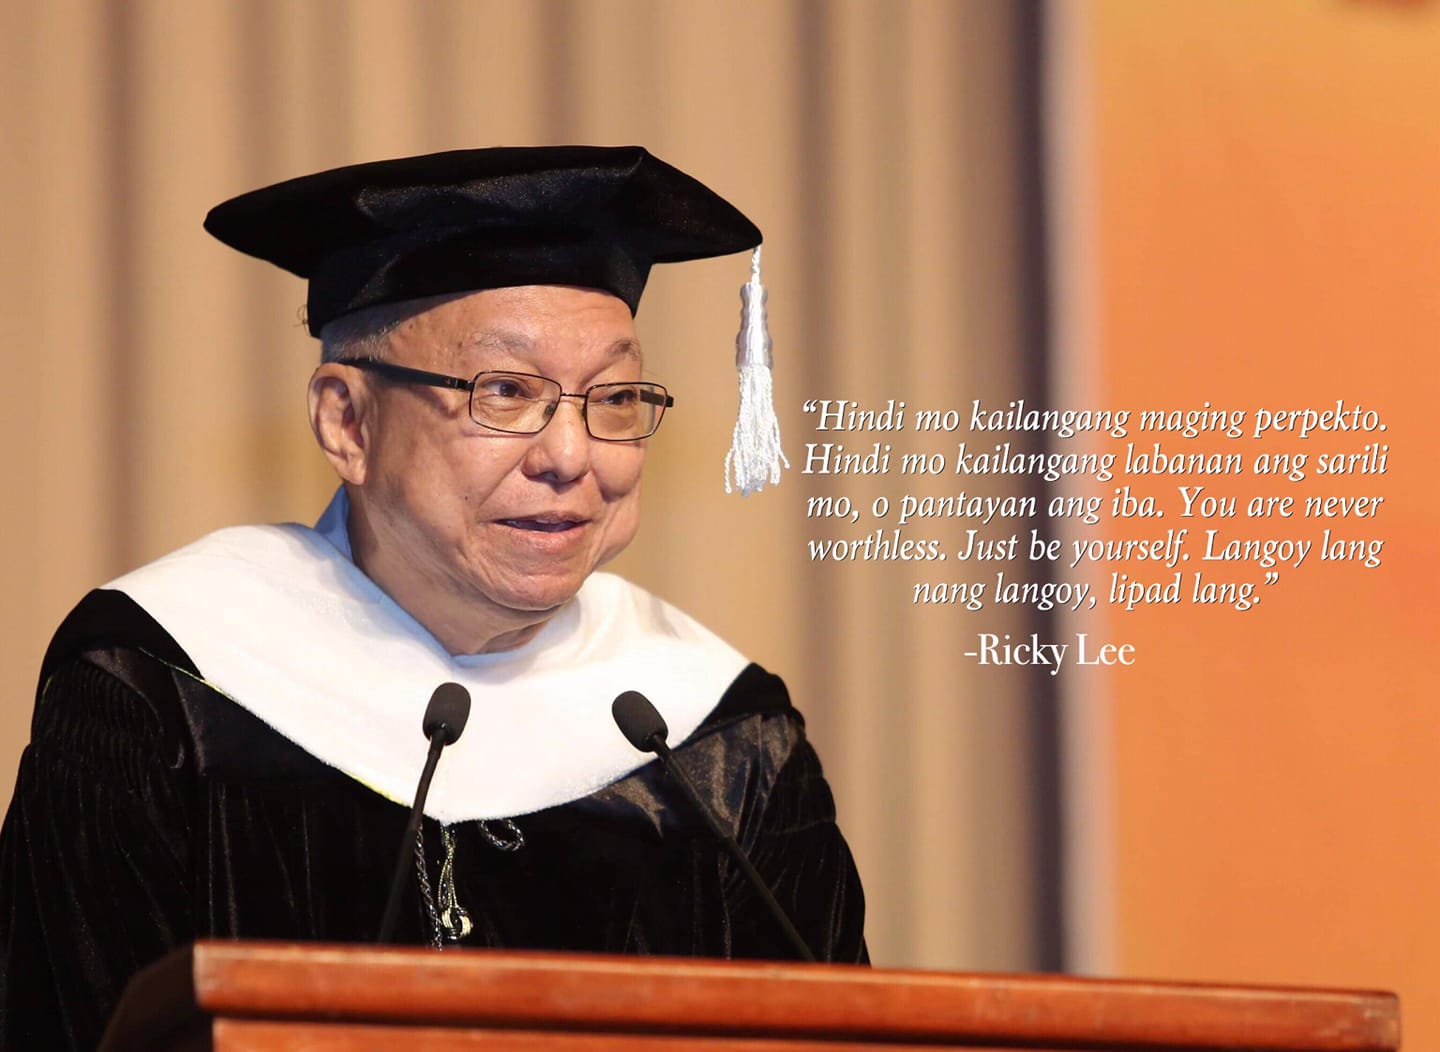 Inspirational Lessons from Ricky Lee